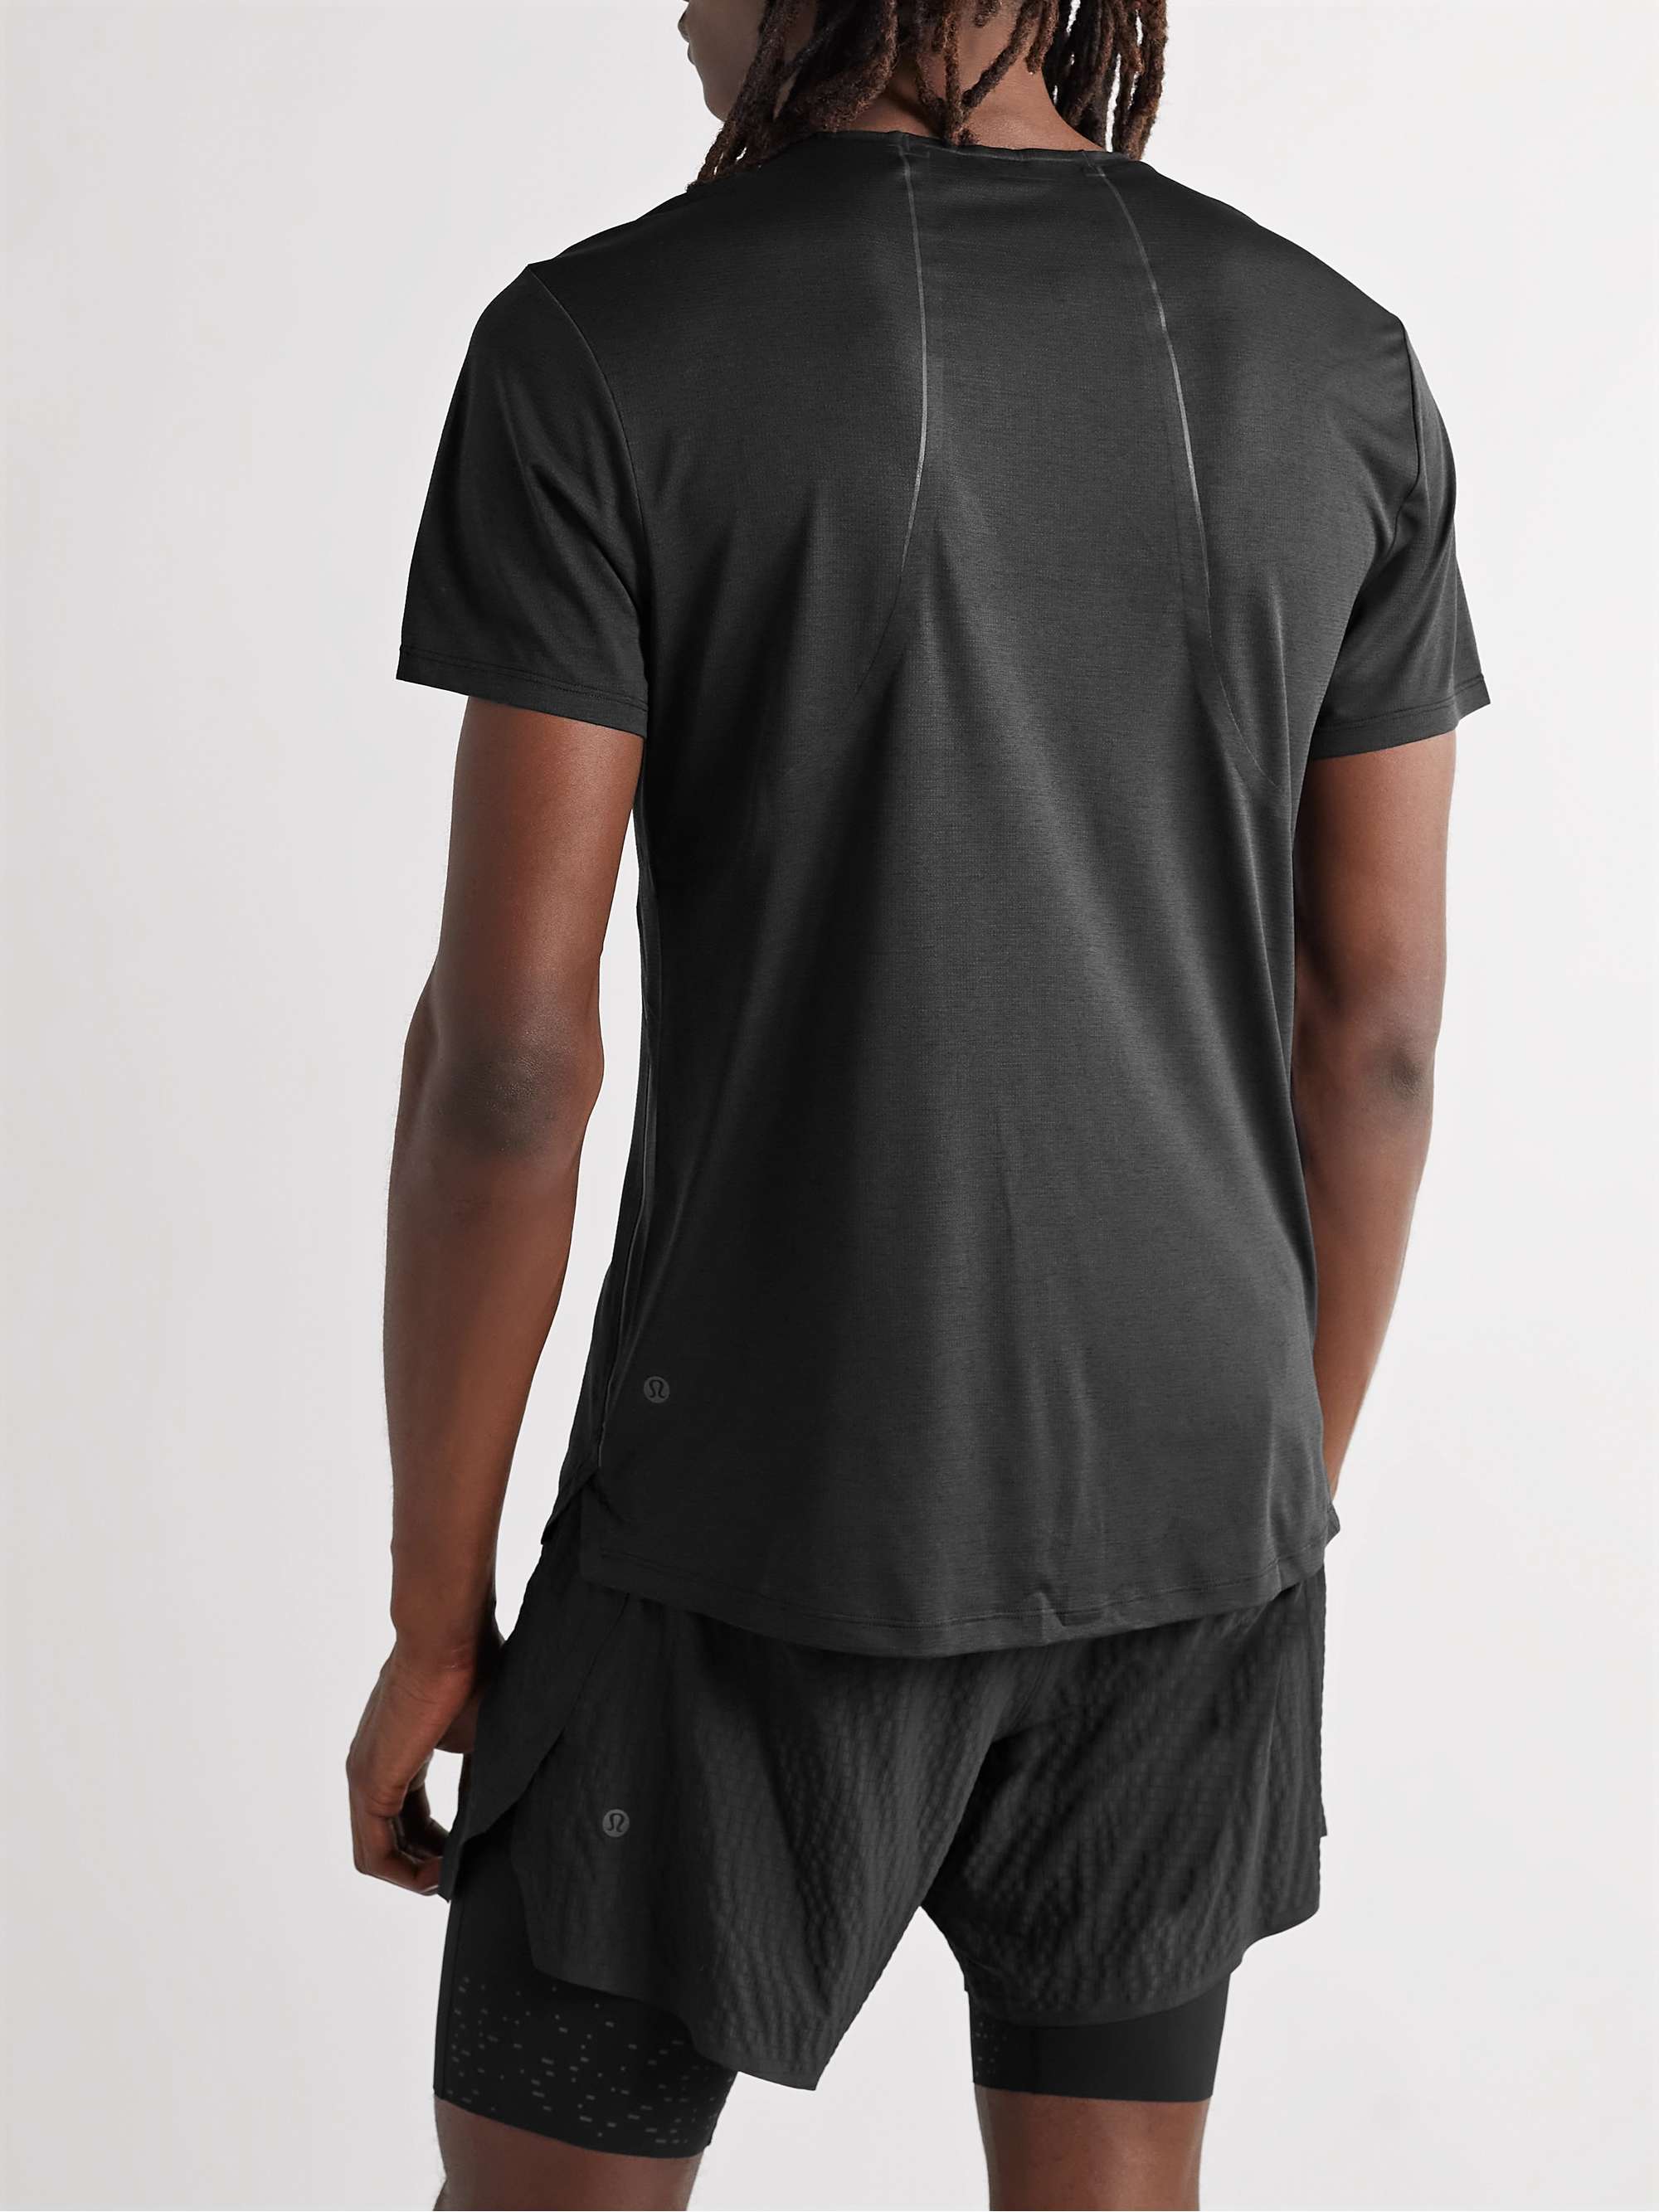 LULULEMON Fast and Free Recycled Breathe Light Mesh T-Shirt